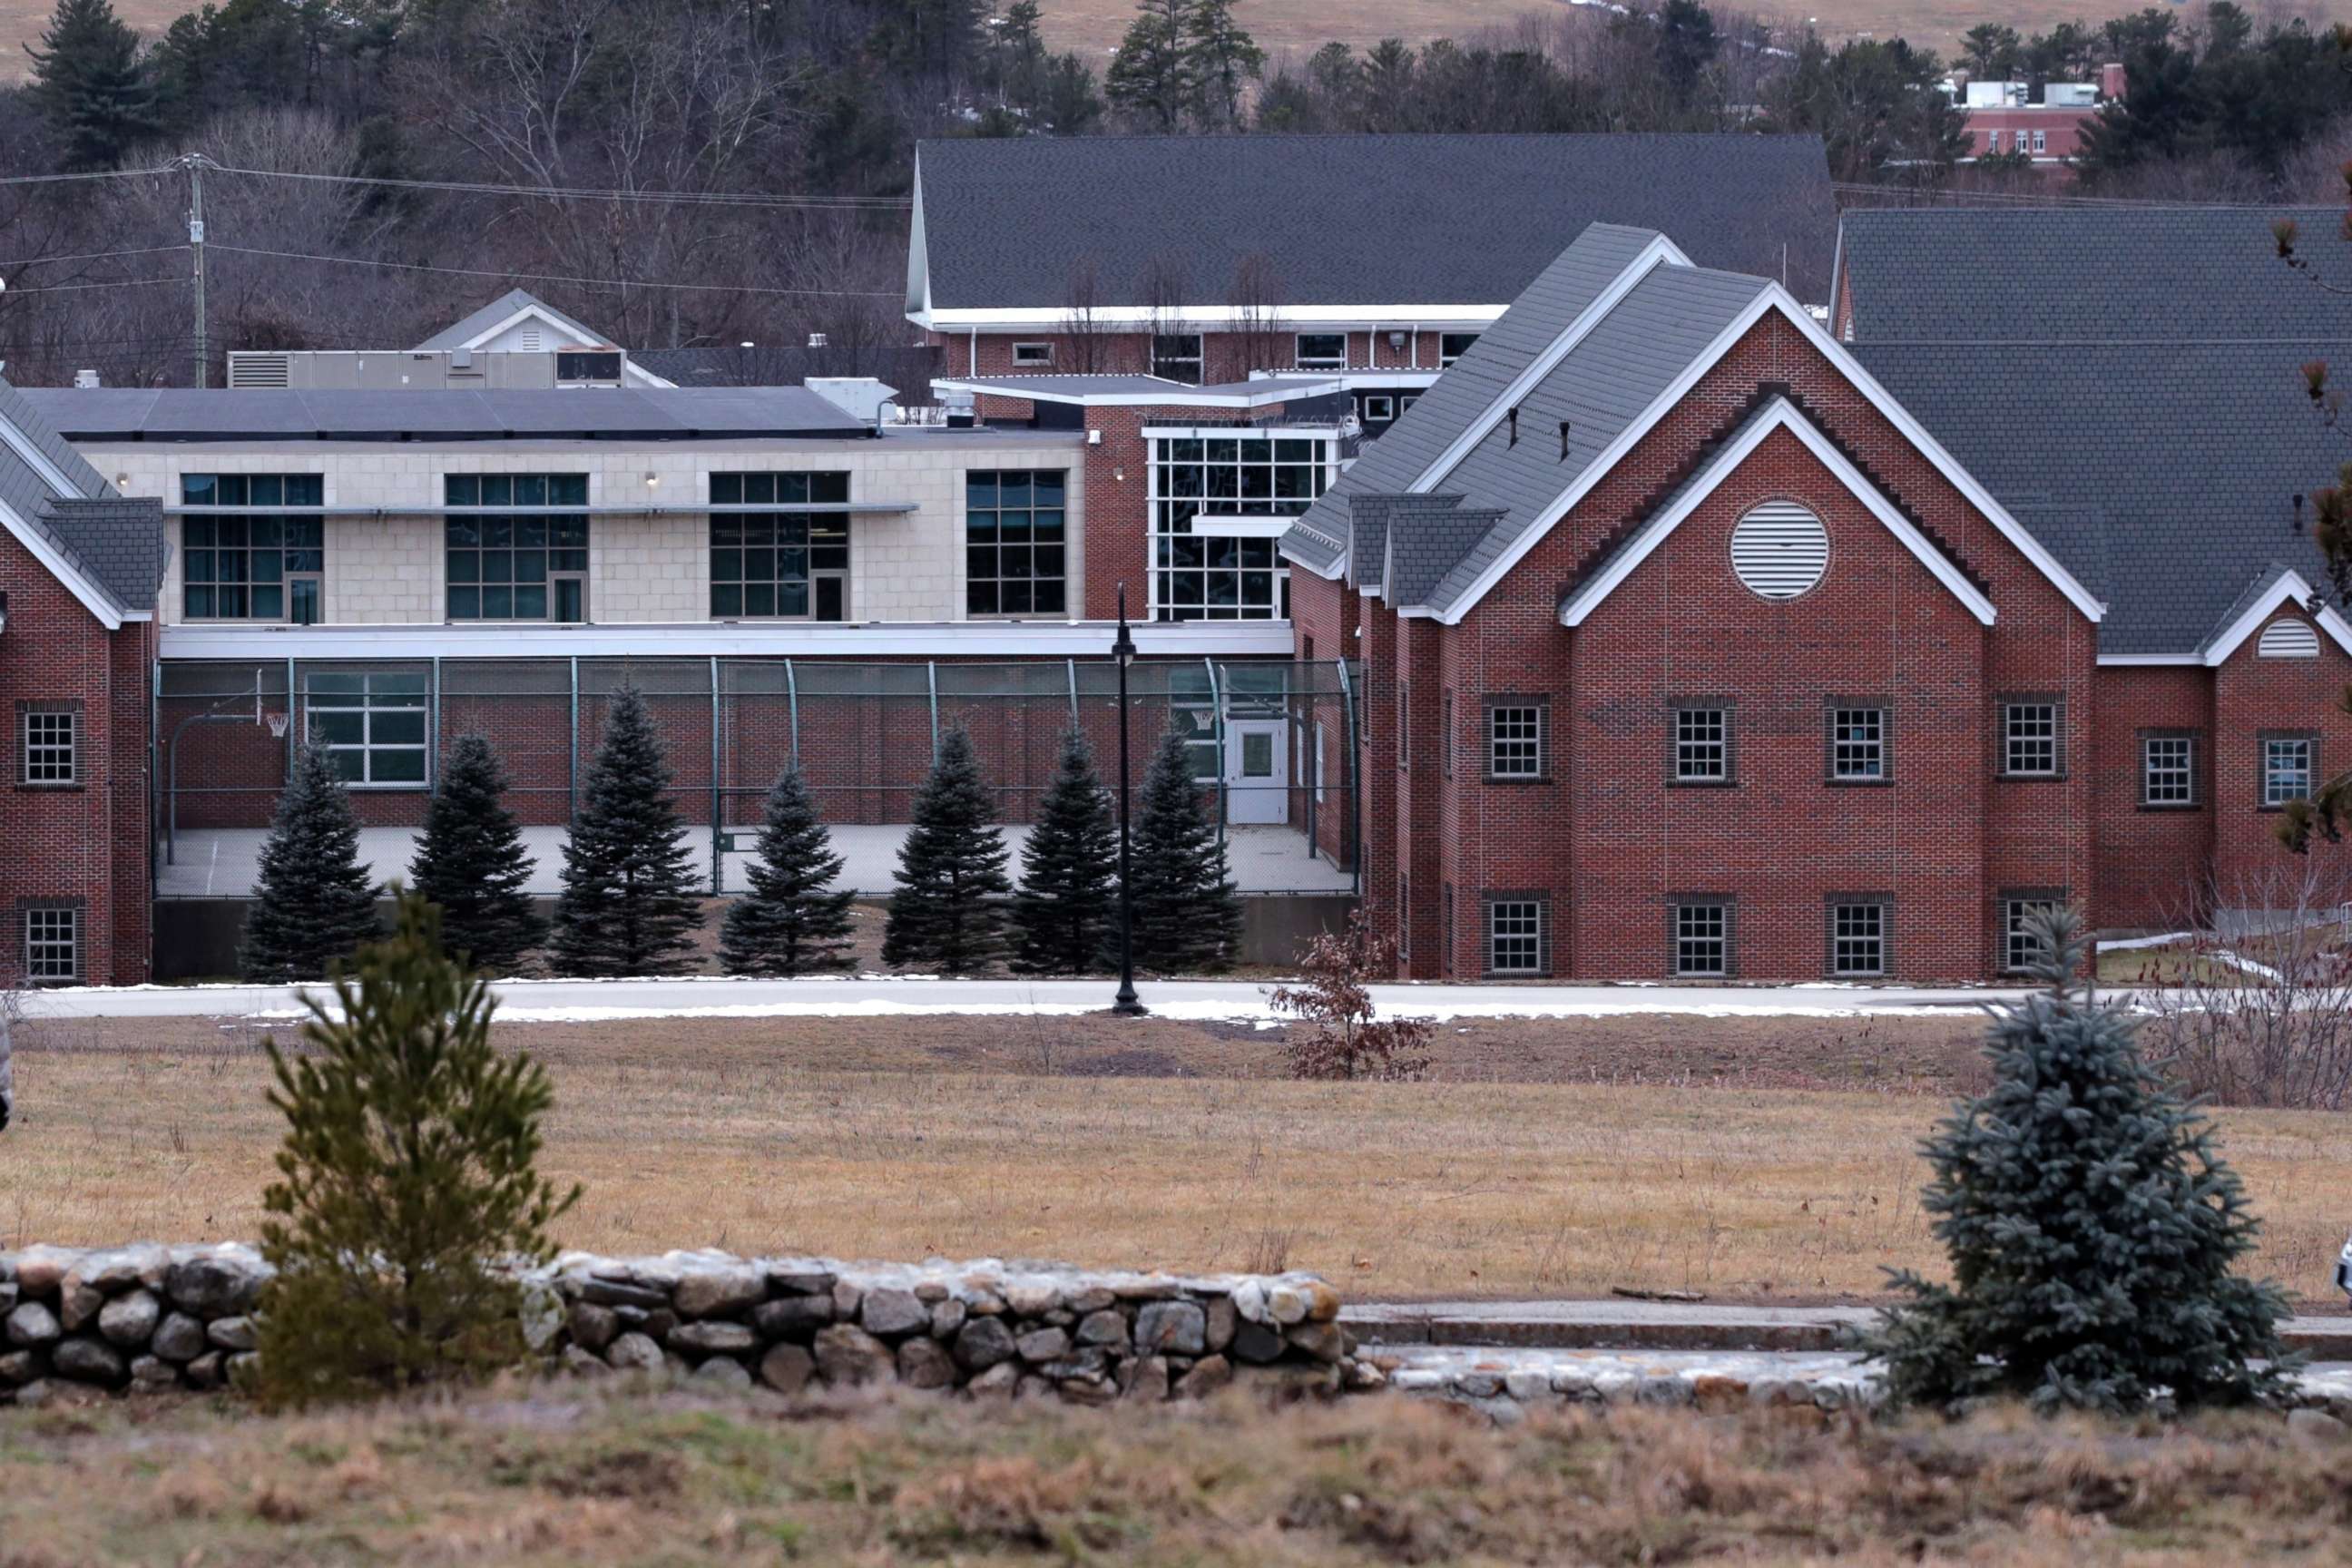 PHOTO: The Sununu Youth Services Center in Manchester, N.H., is pictured on Jan. 28, 2020.